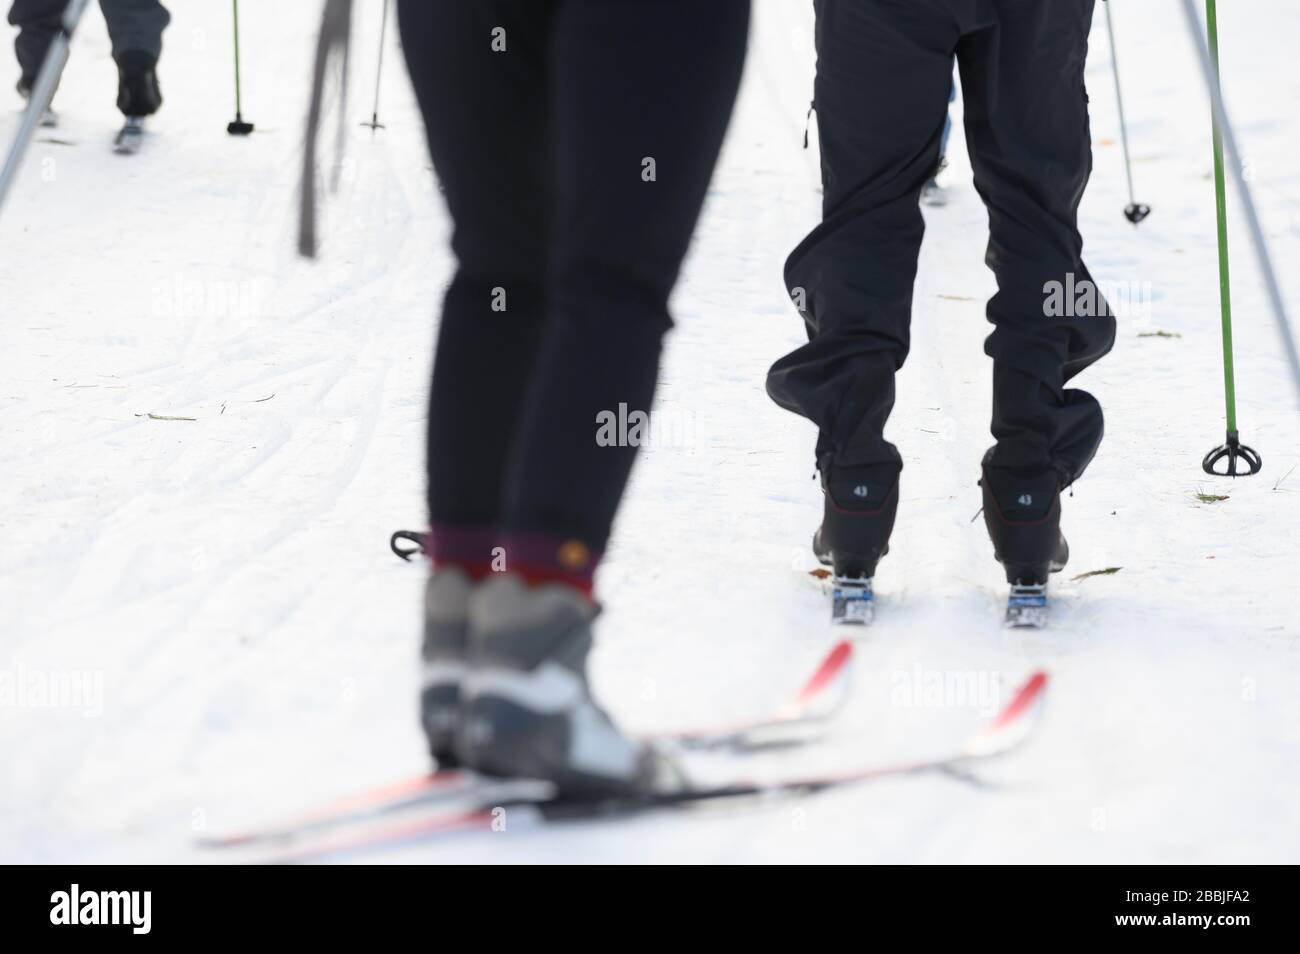 Three skiers heading out to ski at a nordic center Stock Photo